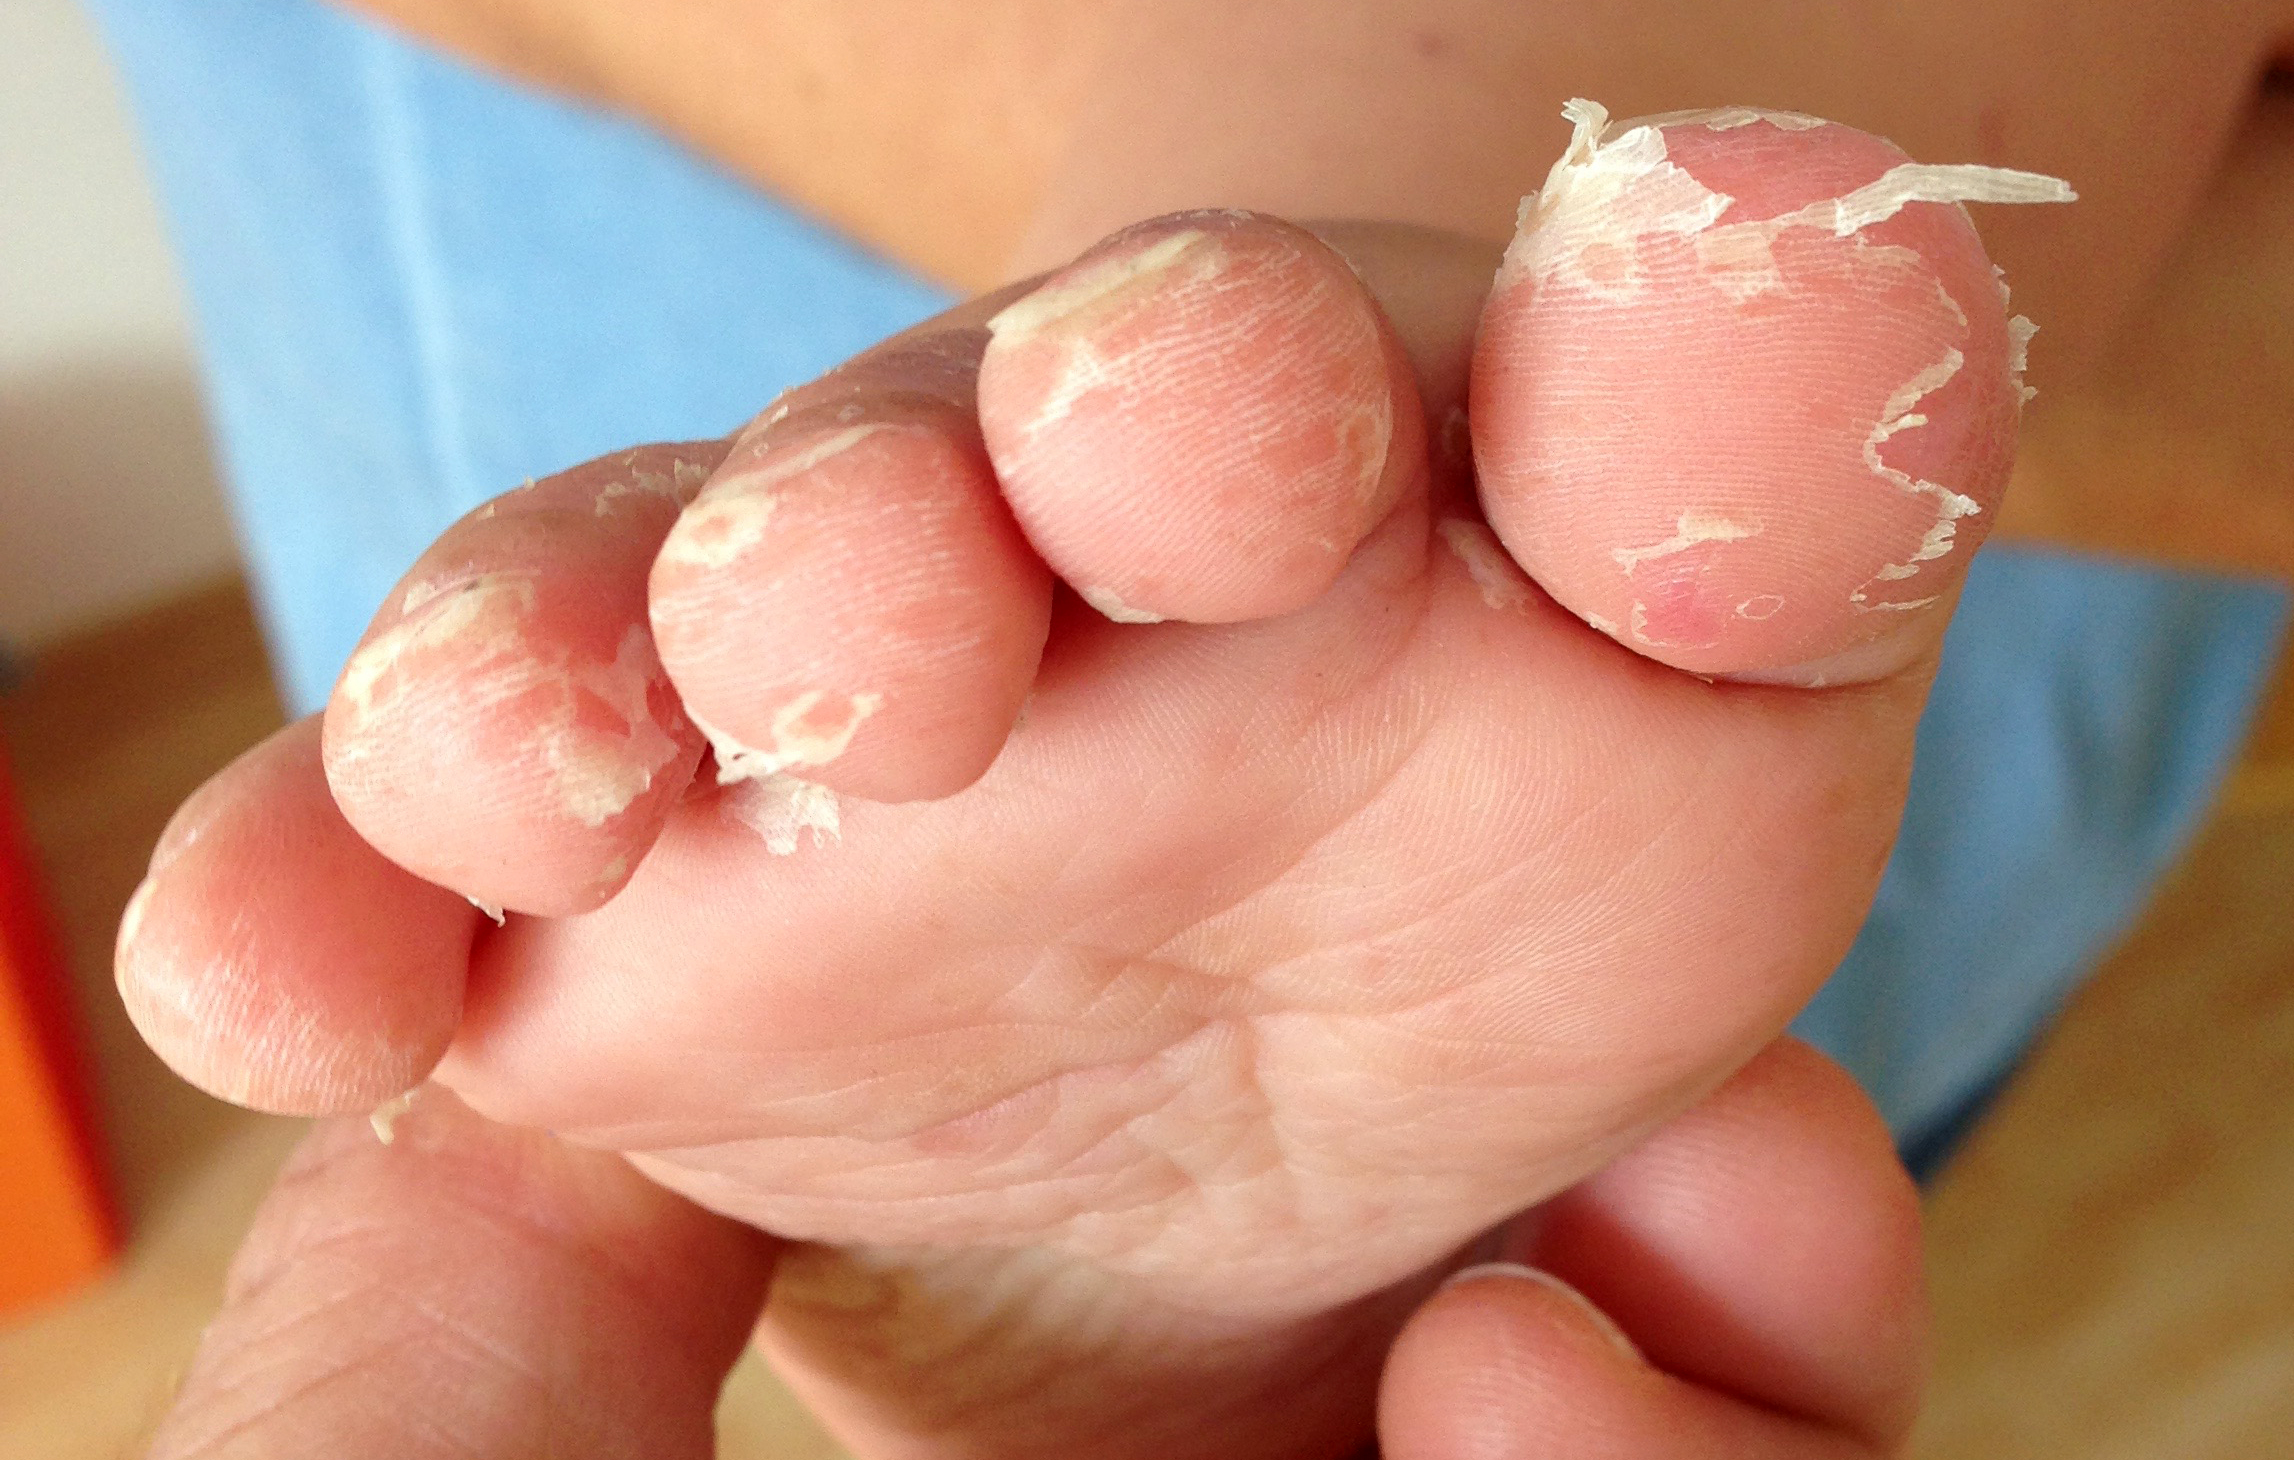 File Desquamation Of The Toes Following A Hand Foot And Mouth Disease 1 Jpg Wikimedia Commons